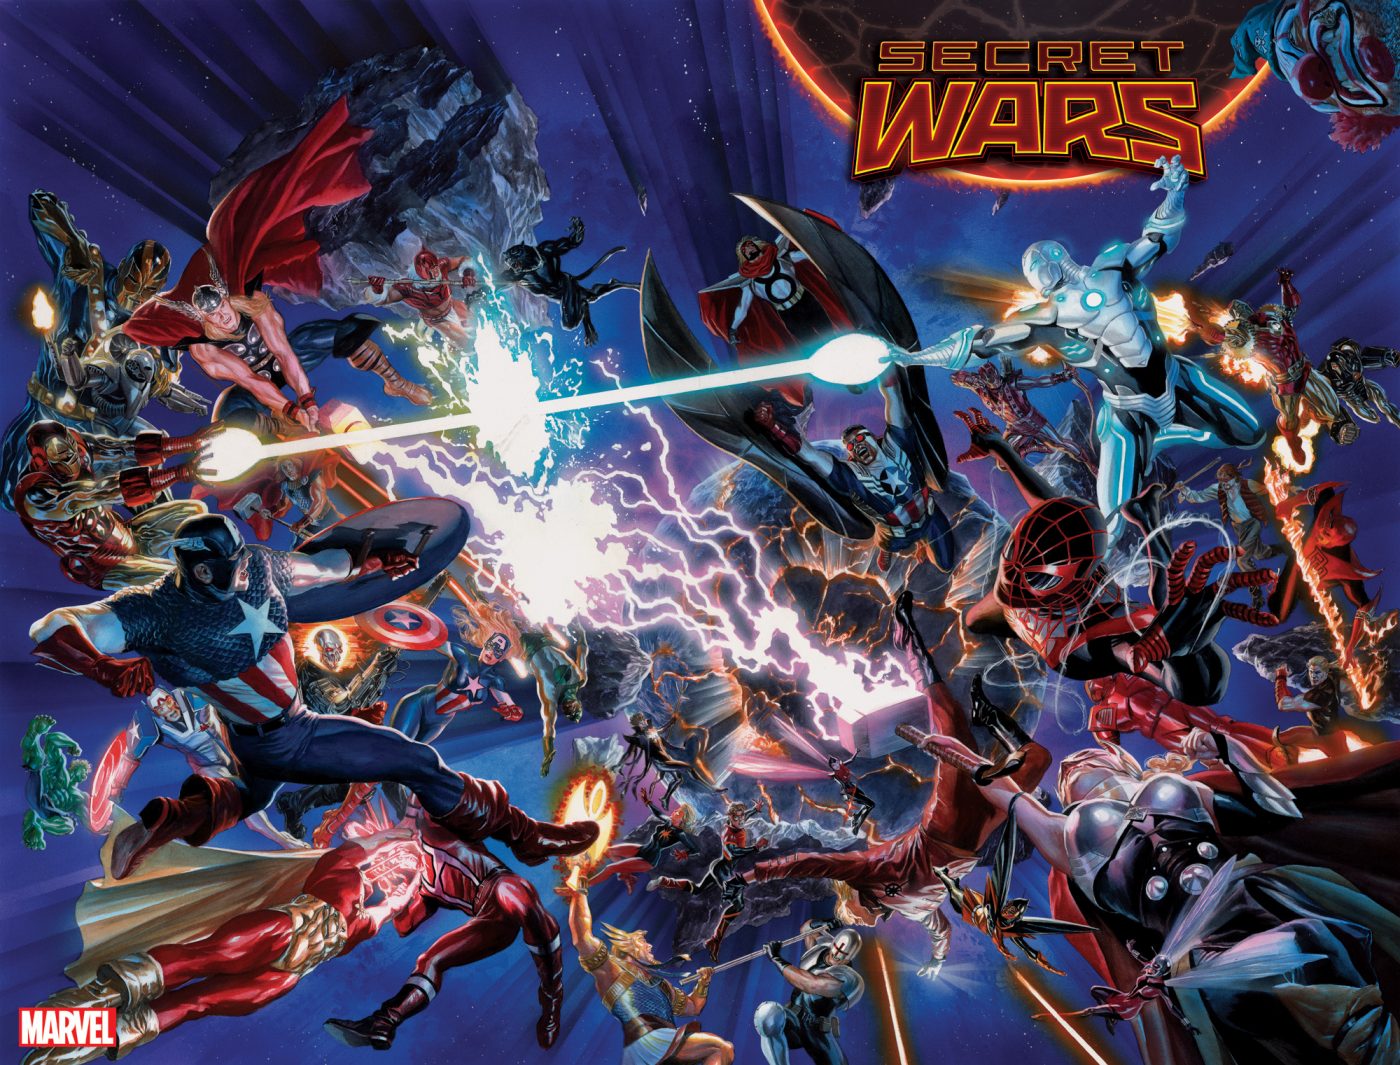 Secret Wars Update: What do the sales say so far?